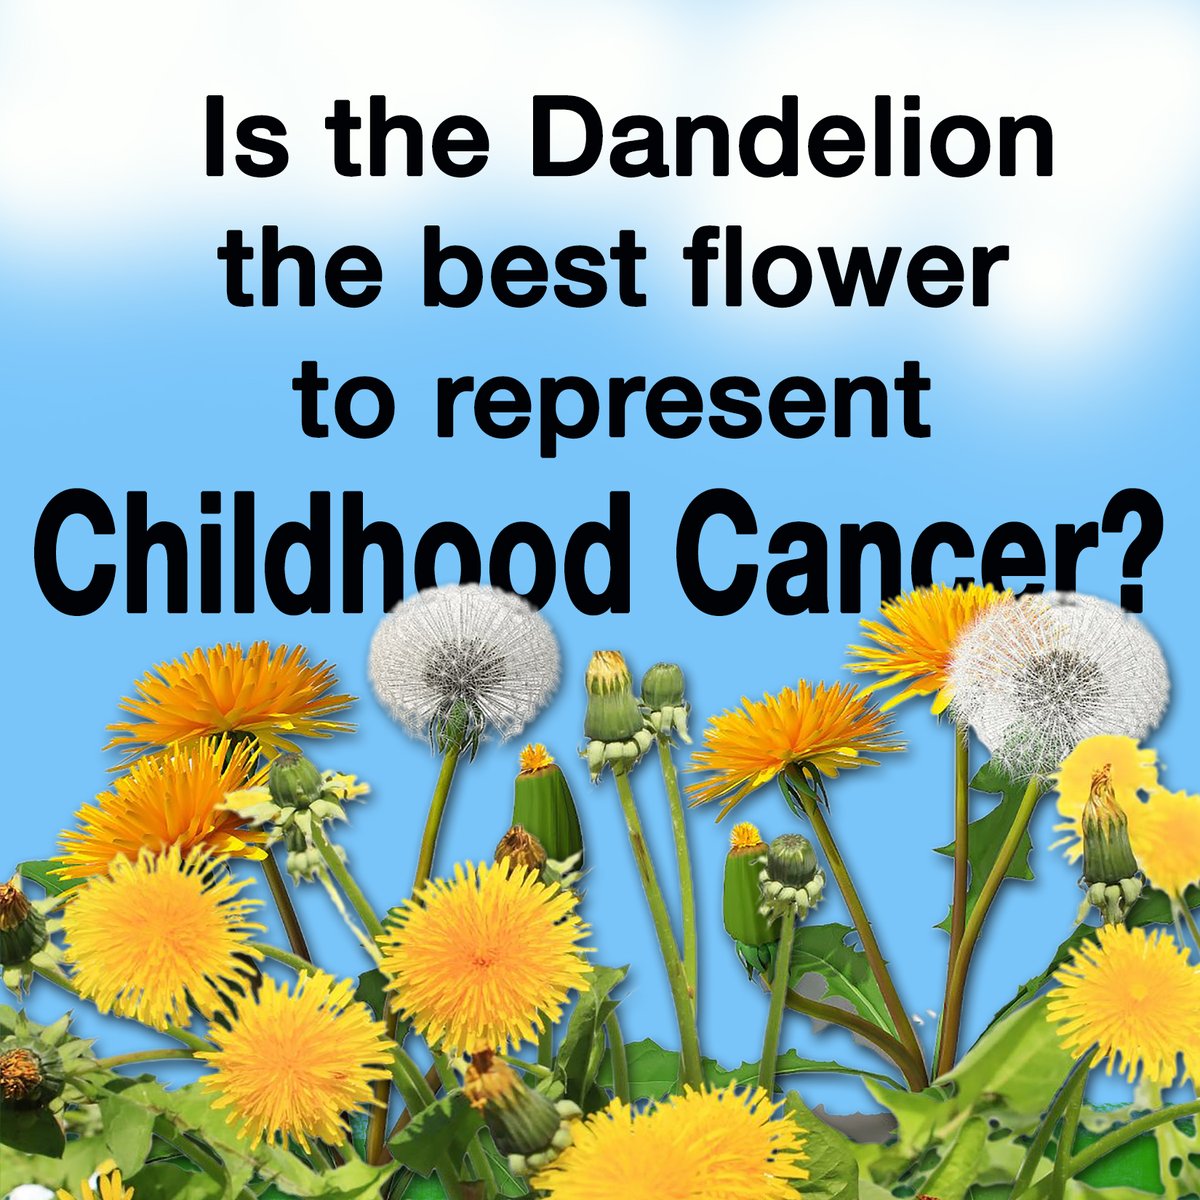 Most parents don't like #ChildhoodCancer or weeds. Kids are attracted to dandelions, & cancer seems to be attracted to kids. Both are hard to cure. Chemicals appear to work well at first, but may cause unwanted late effects. #FindACure @cac2org @HappyQuailPress @leezawilllshe